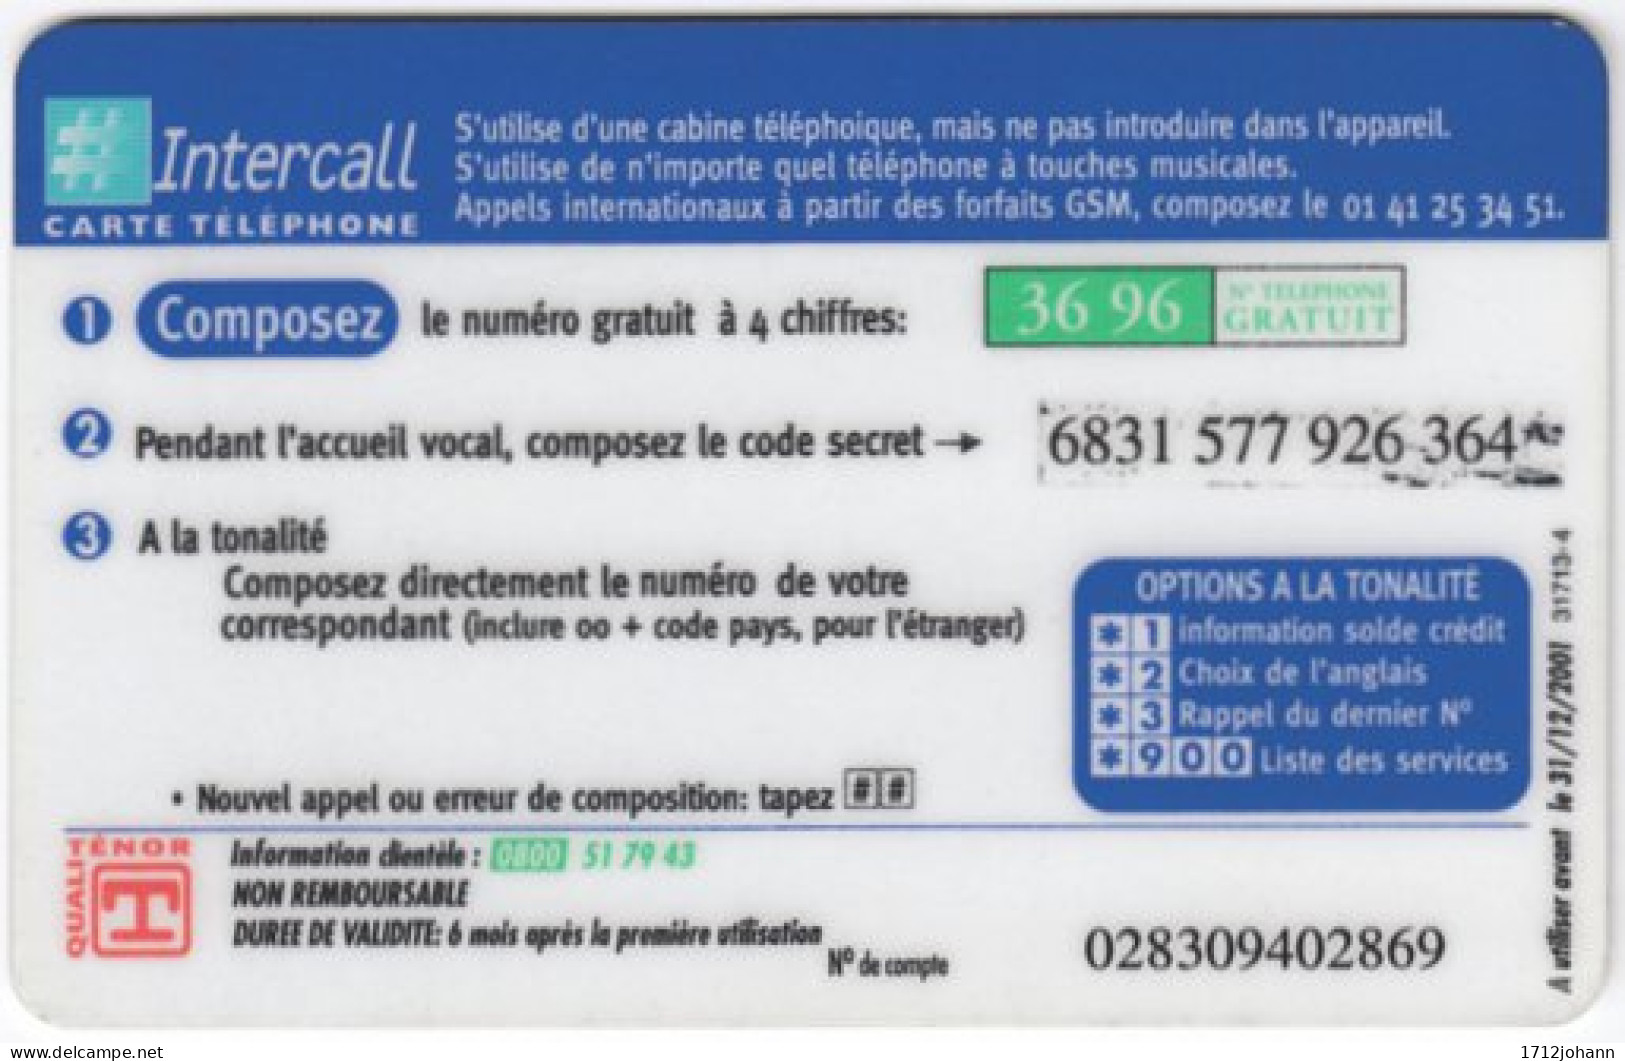 FRANCE C-483 Prepaid Intercall - Map, Globe - Used - Cellphone Cards (refills)